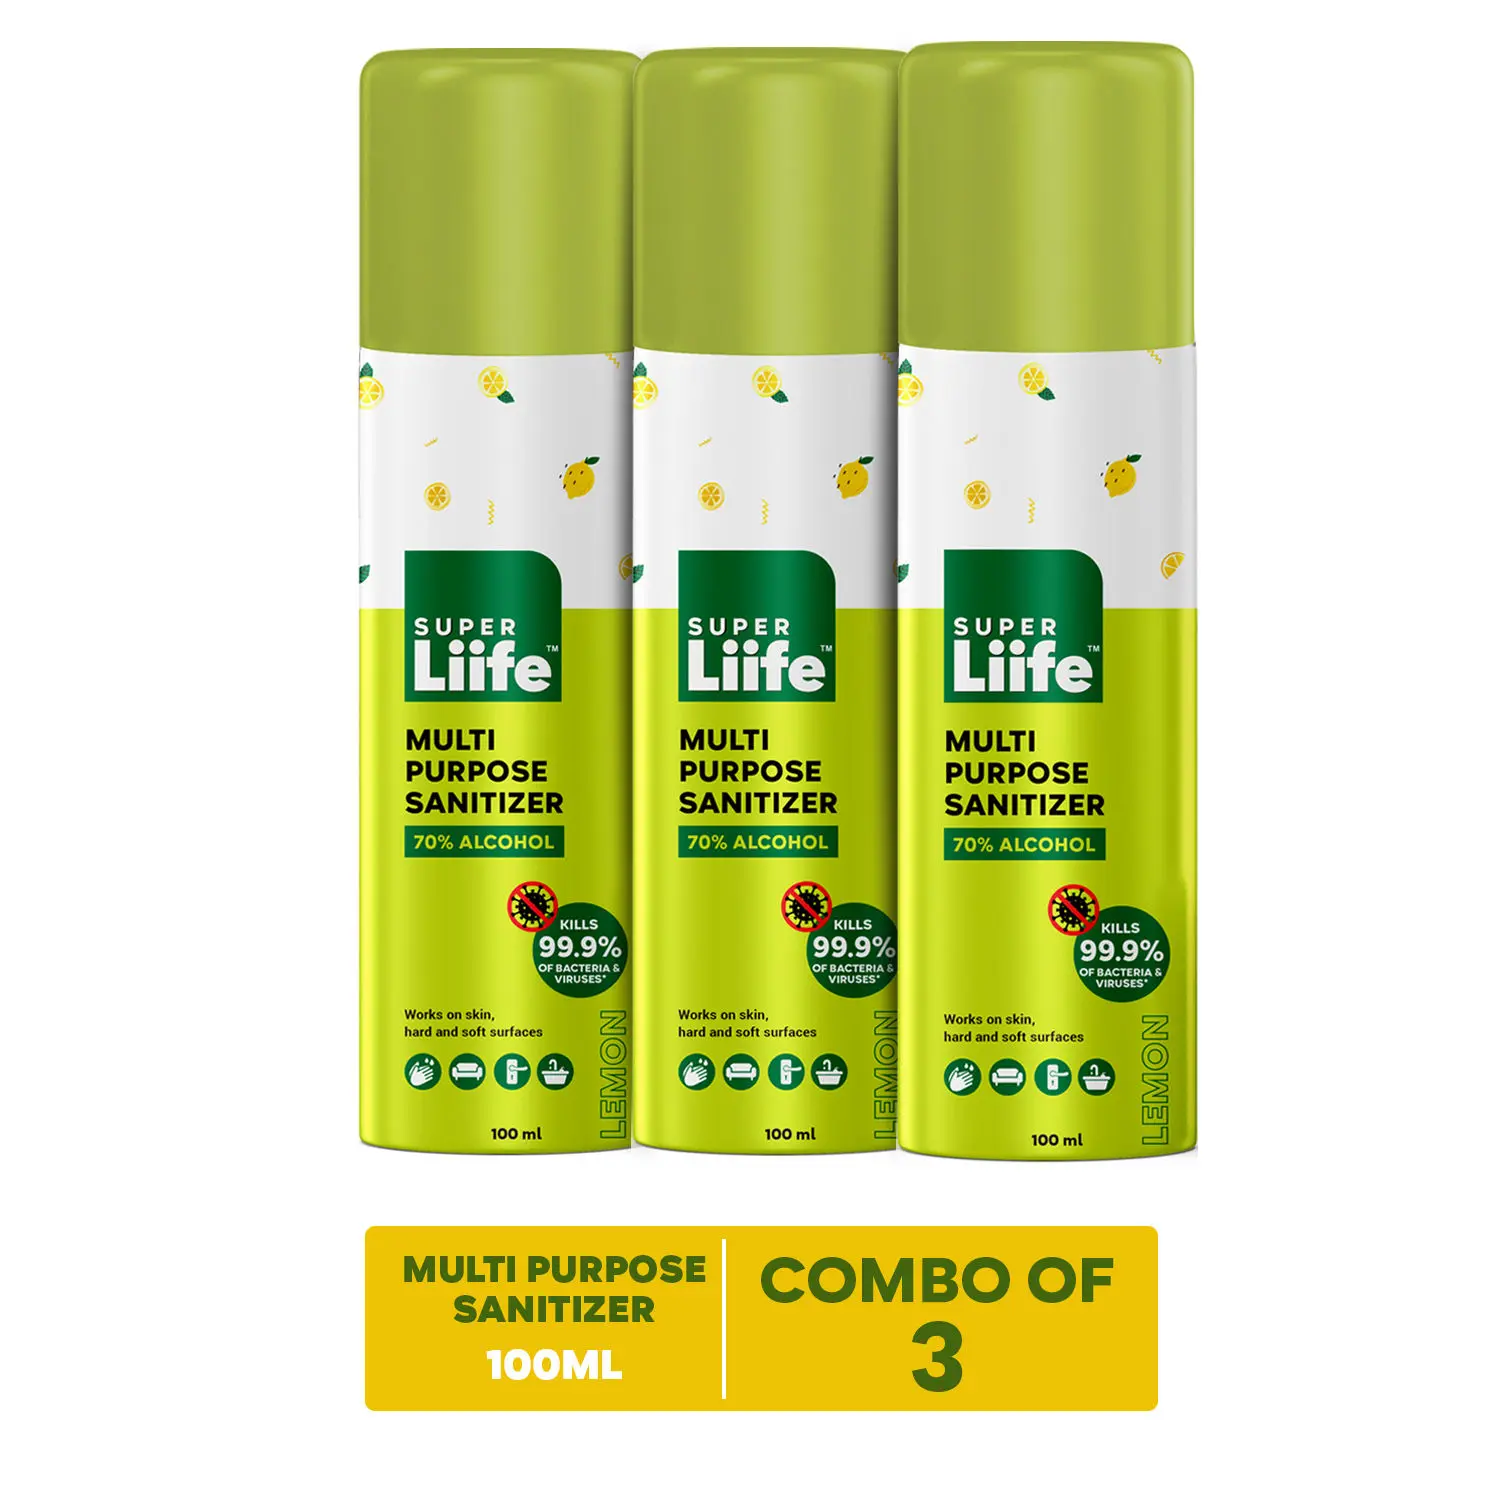 Super Liife Multi Purpose Sanitizer (100ml)-Lemon, Germ Protection On Skin, Hard and Soft Surface- Pack of 3